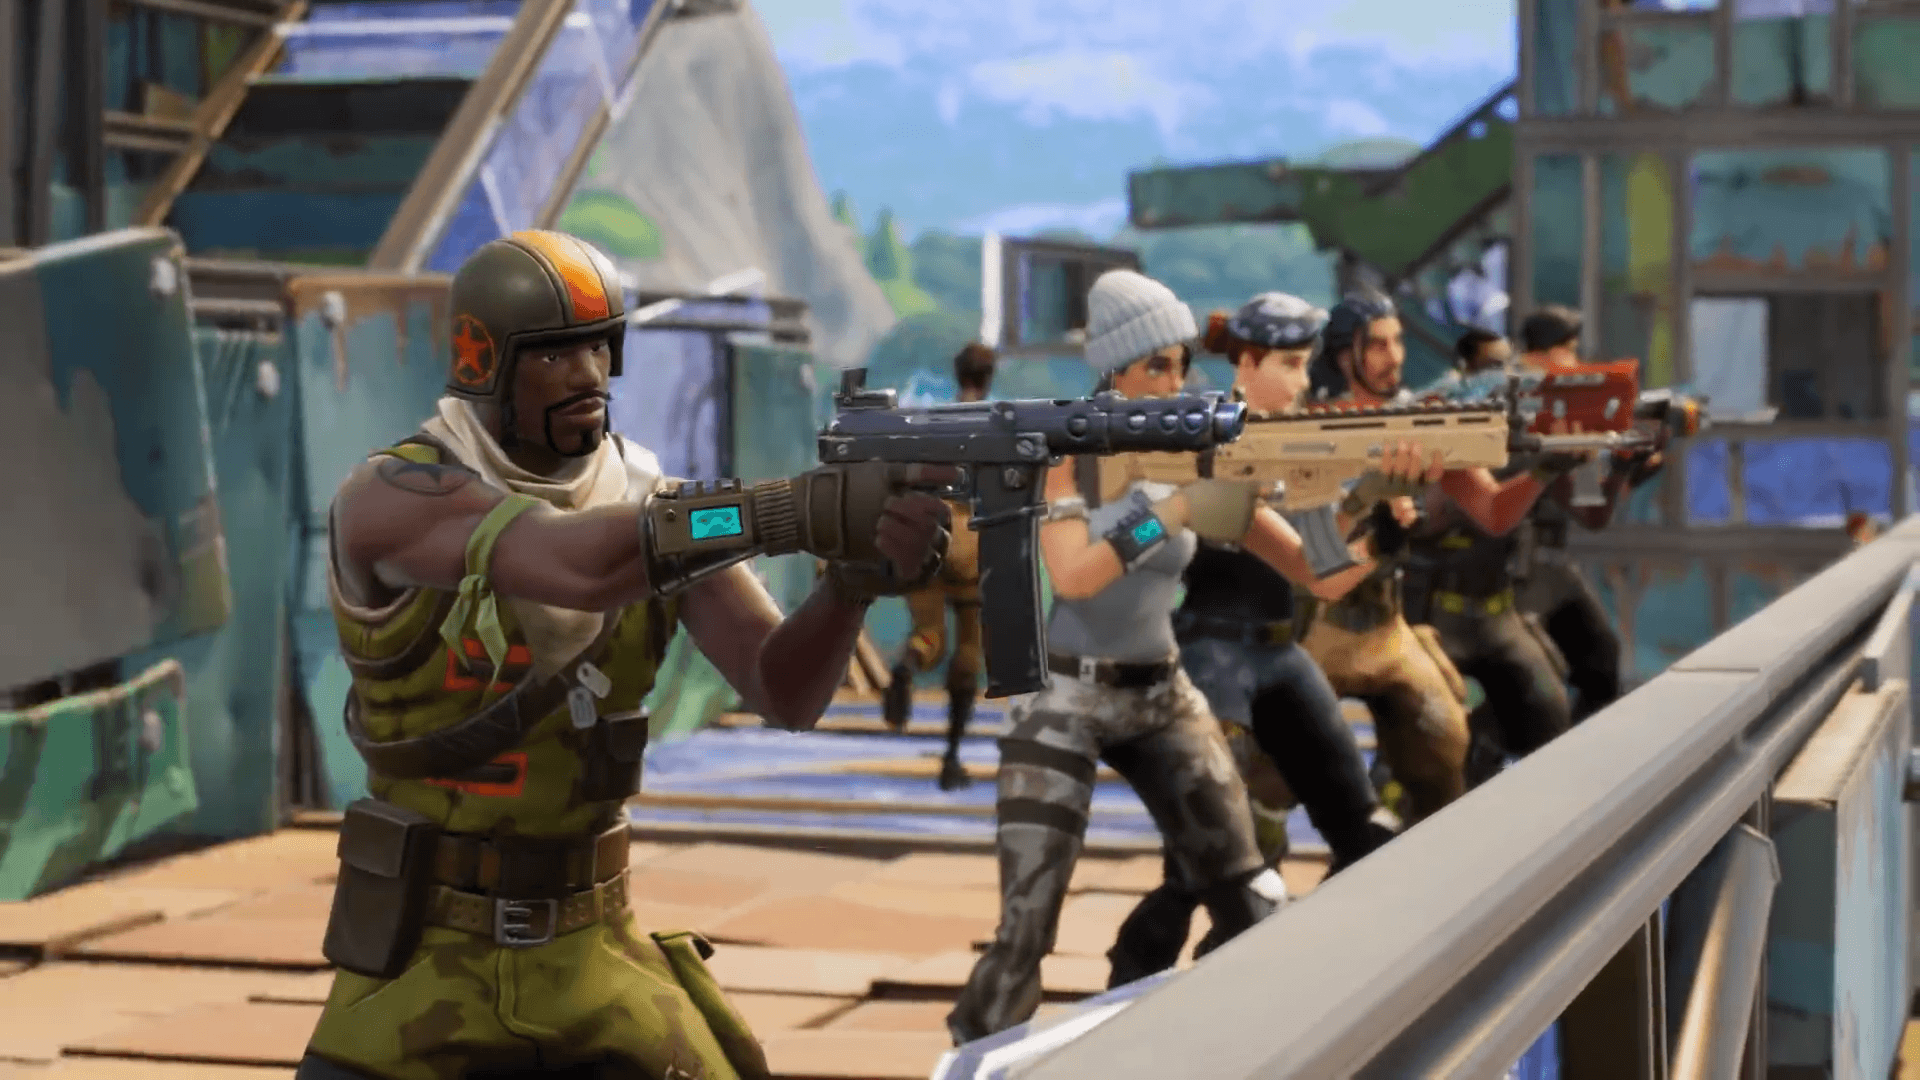 Free Fortnite: Battle Royale Items Available On PS4 For PS Plus